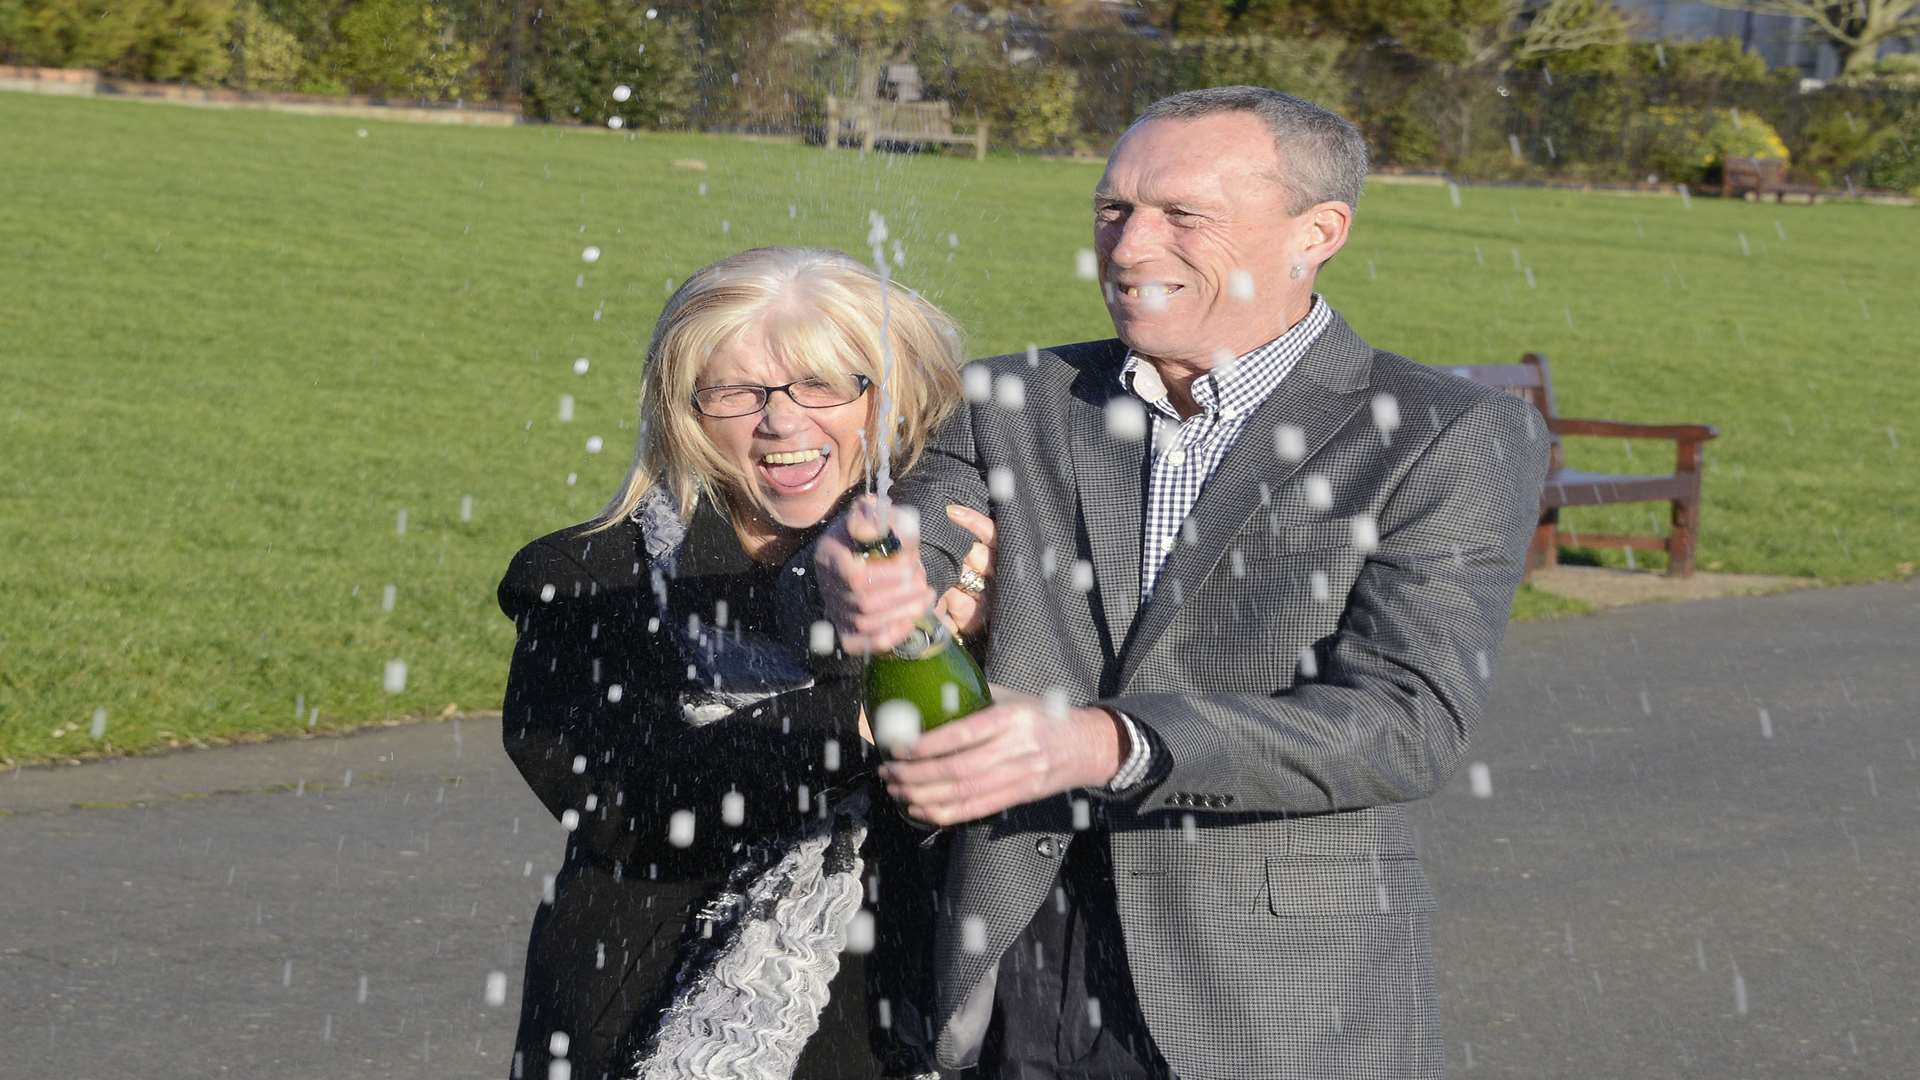 Marjorie and Alan pop the champagne to celebrate